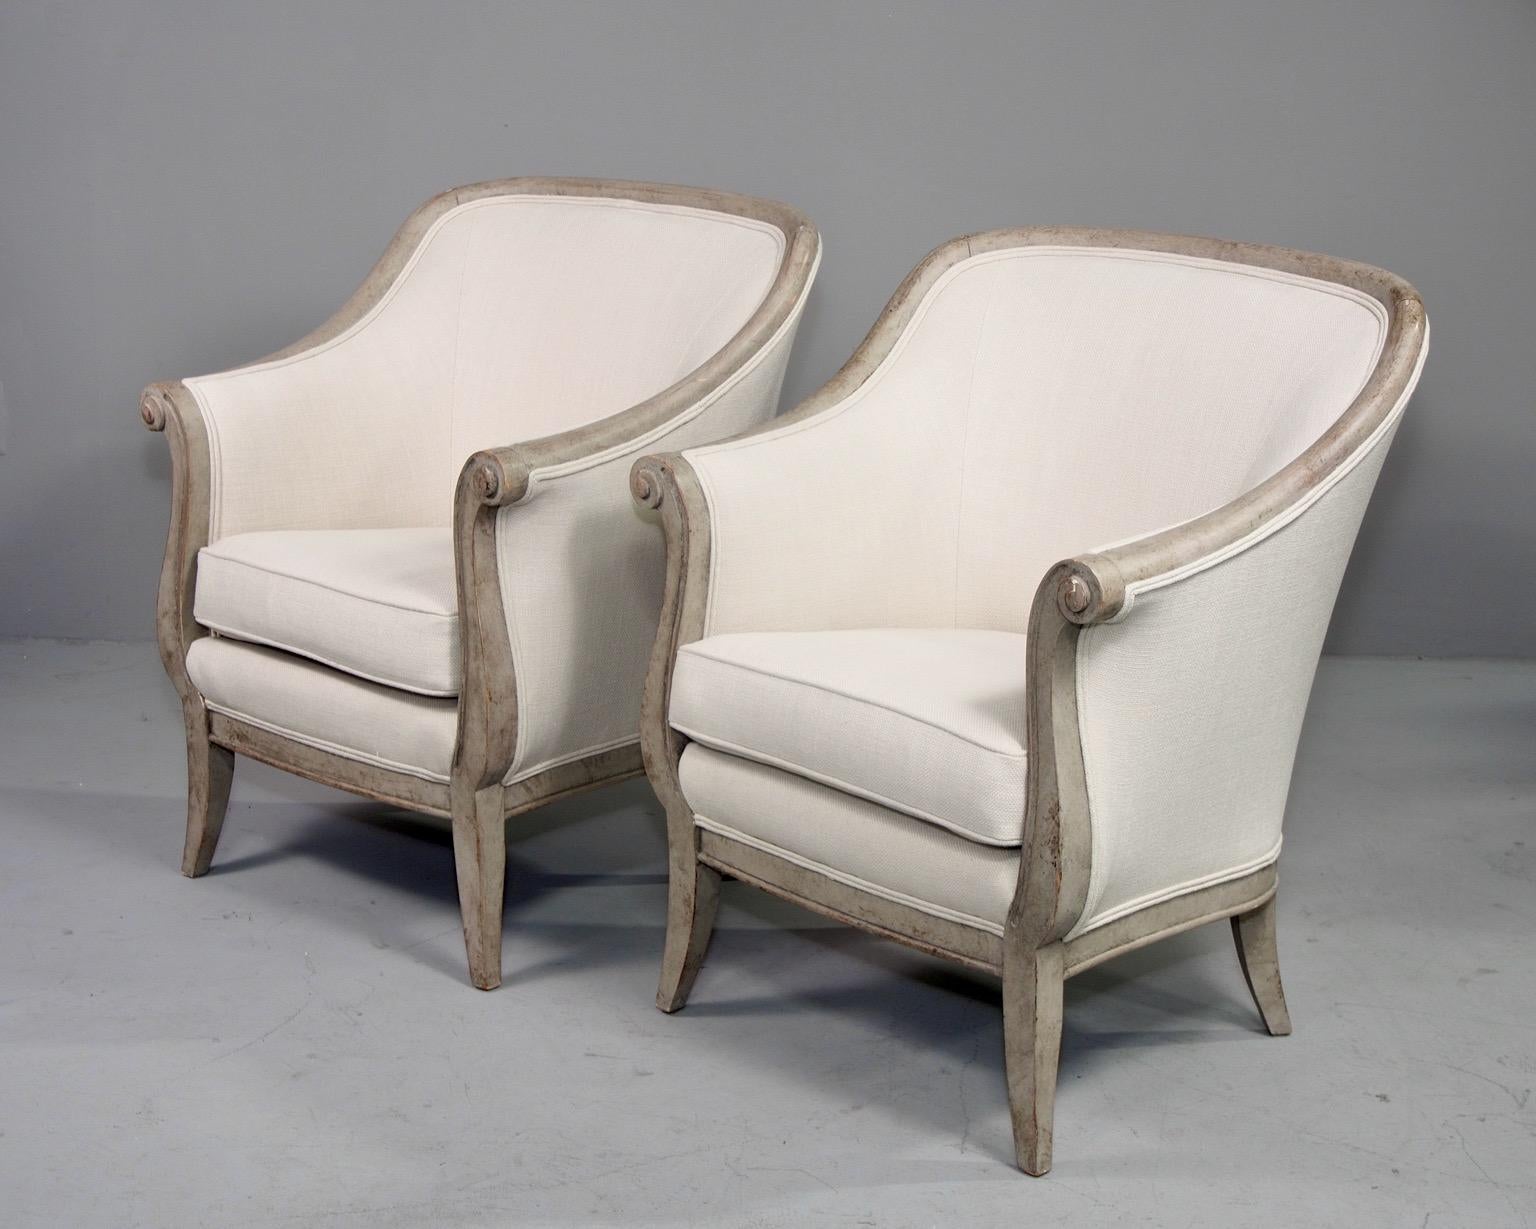 Pair of upholstered arm chairs with curvy wood frames and a greige painted finish, circa 1980s. Curved back rests and removable seat cushion. Newly upholstered in commercial-grade off-white linen/cotton/poly blend dobby weave fabric. Made by Decca